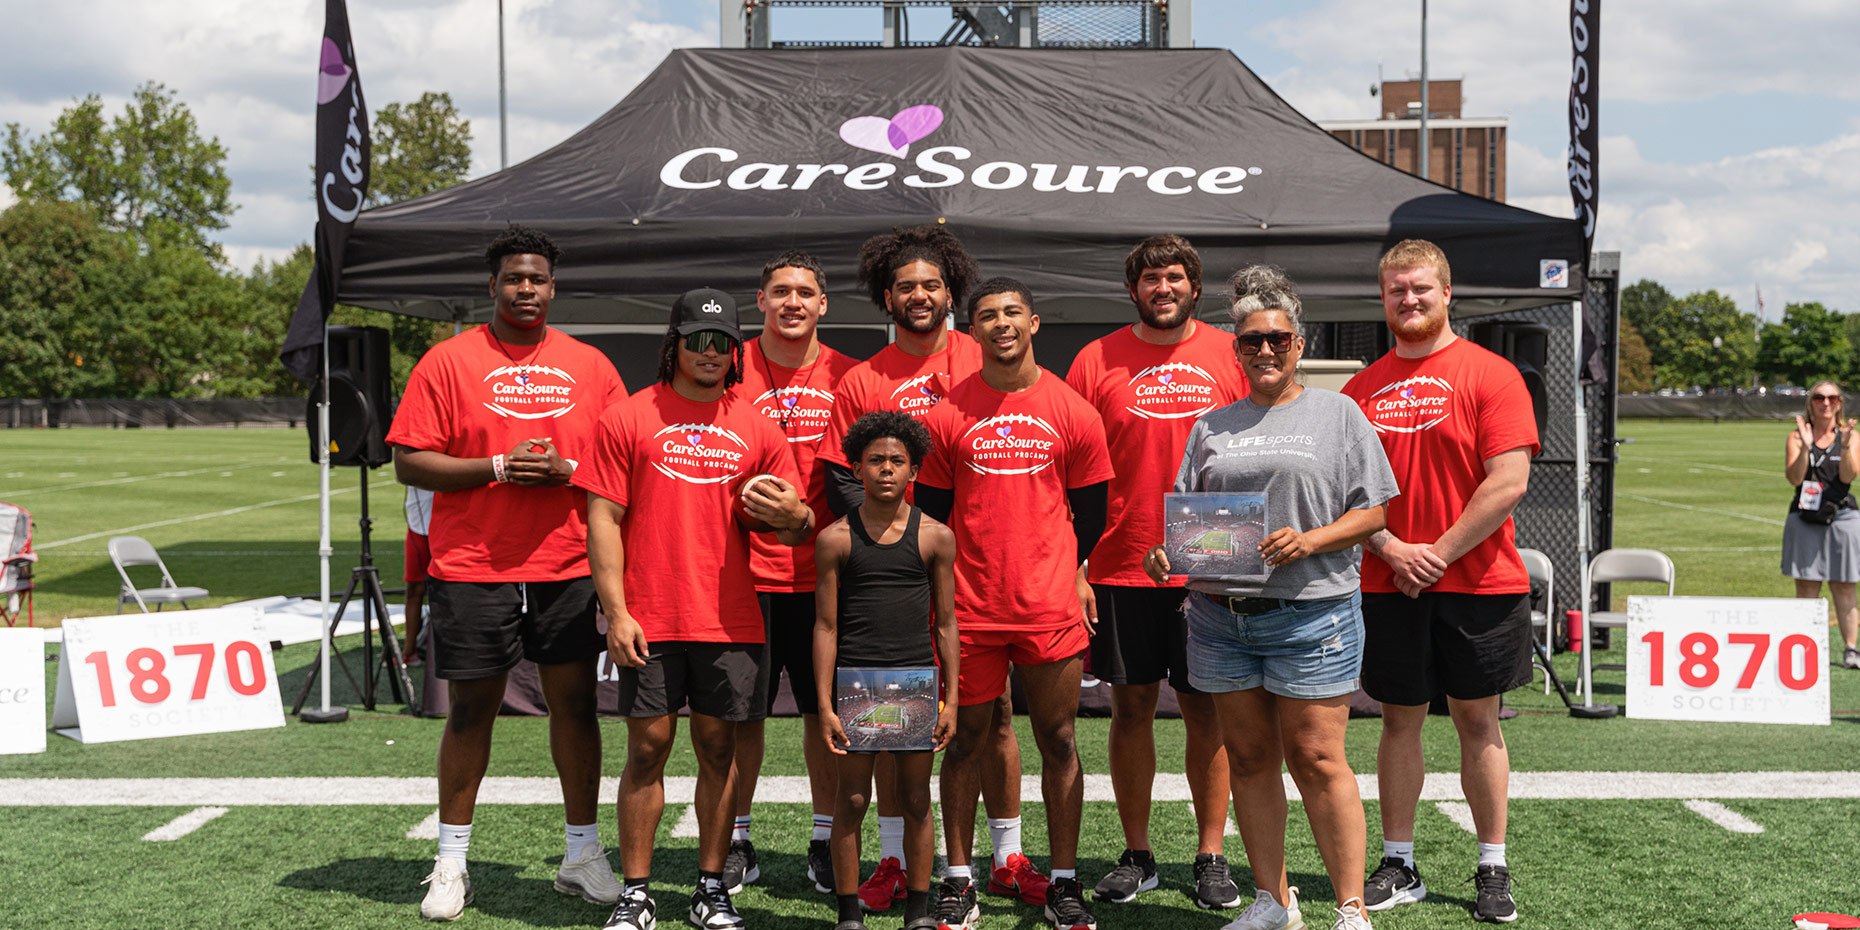 Ohio State University and Care Source Football Pro Camp